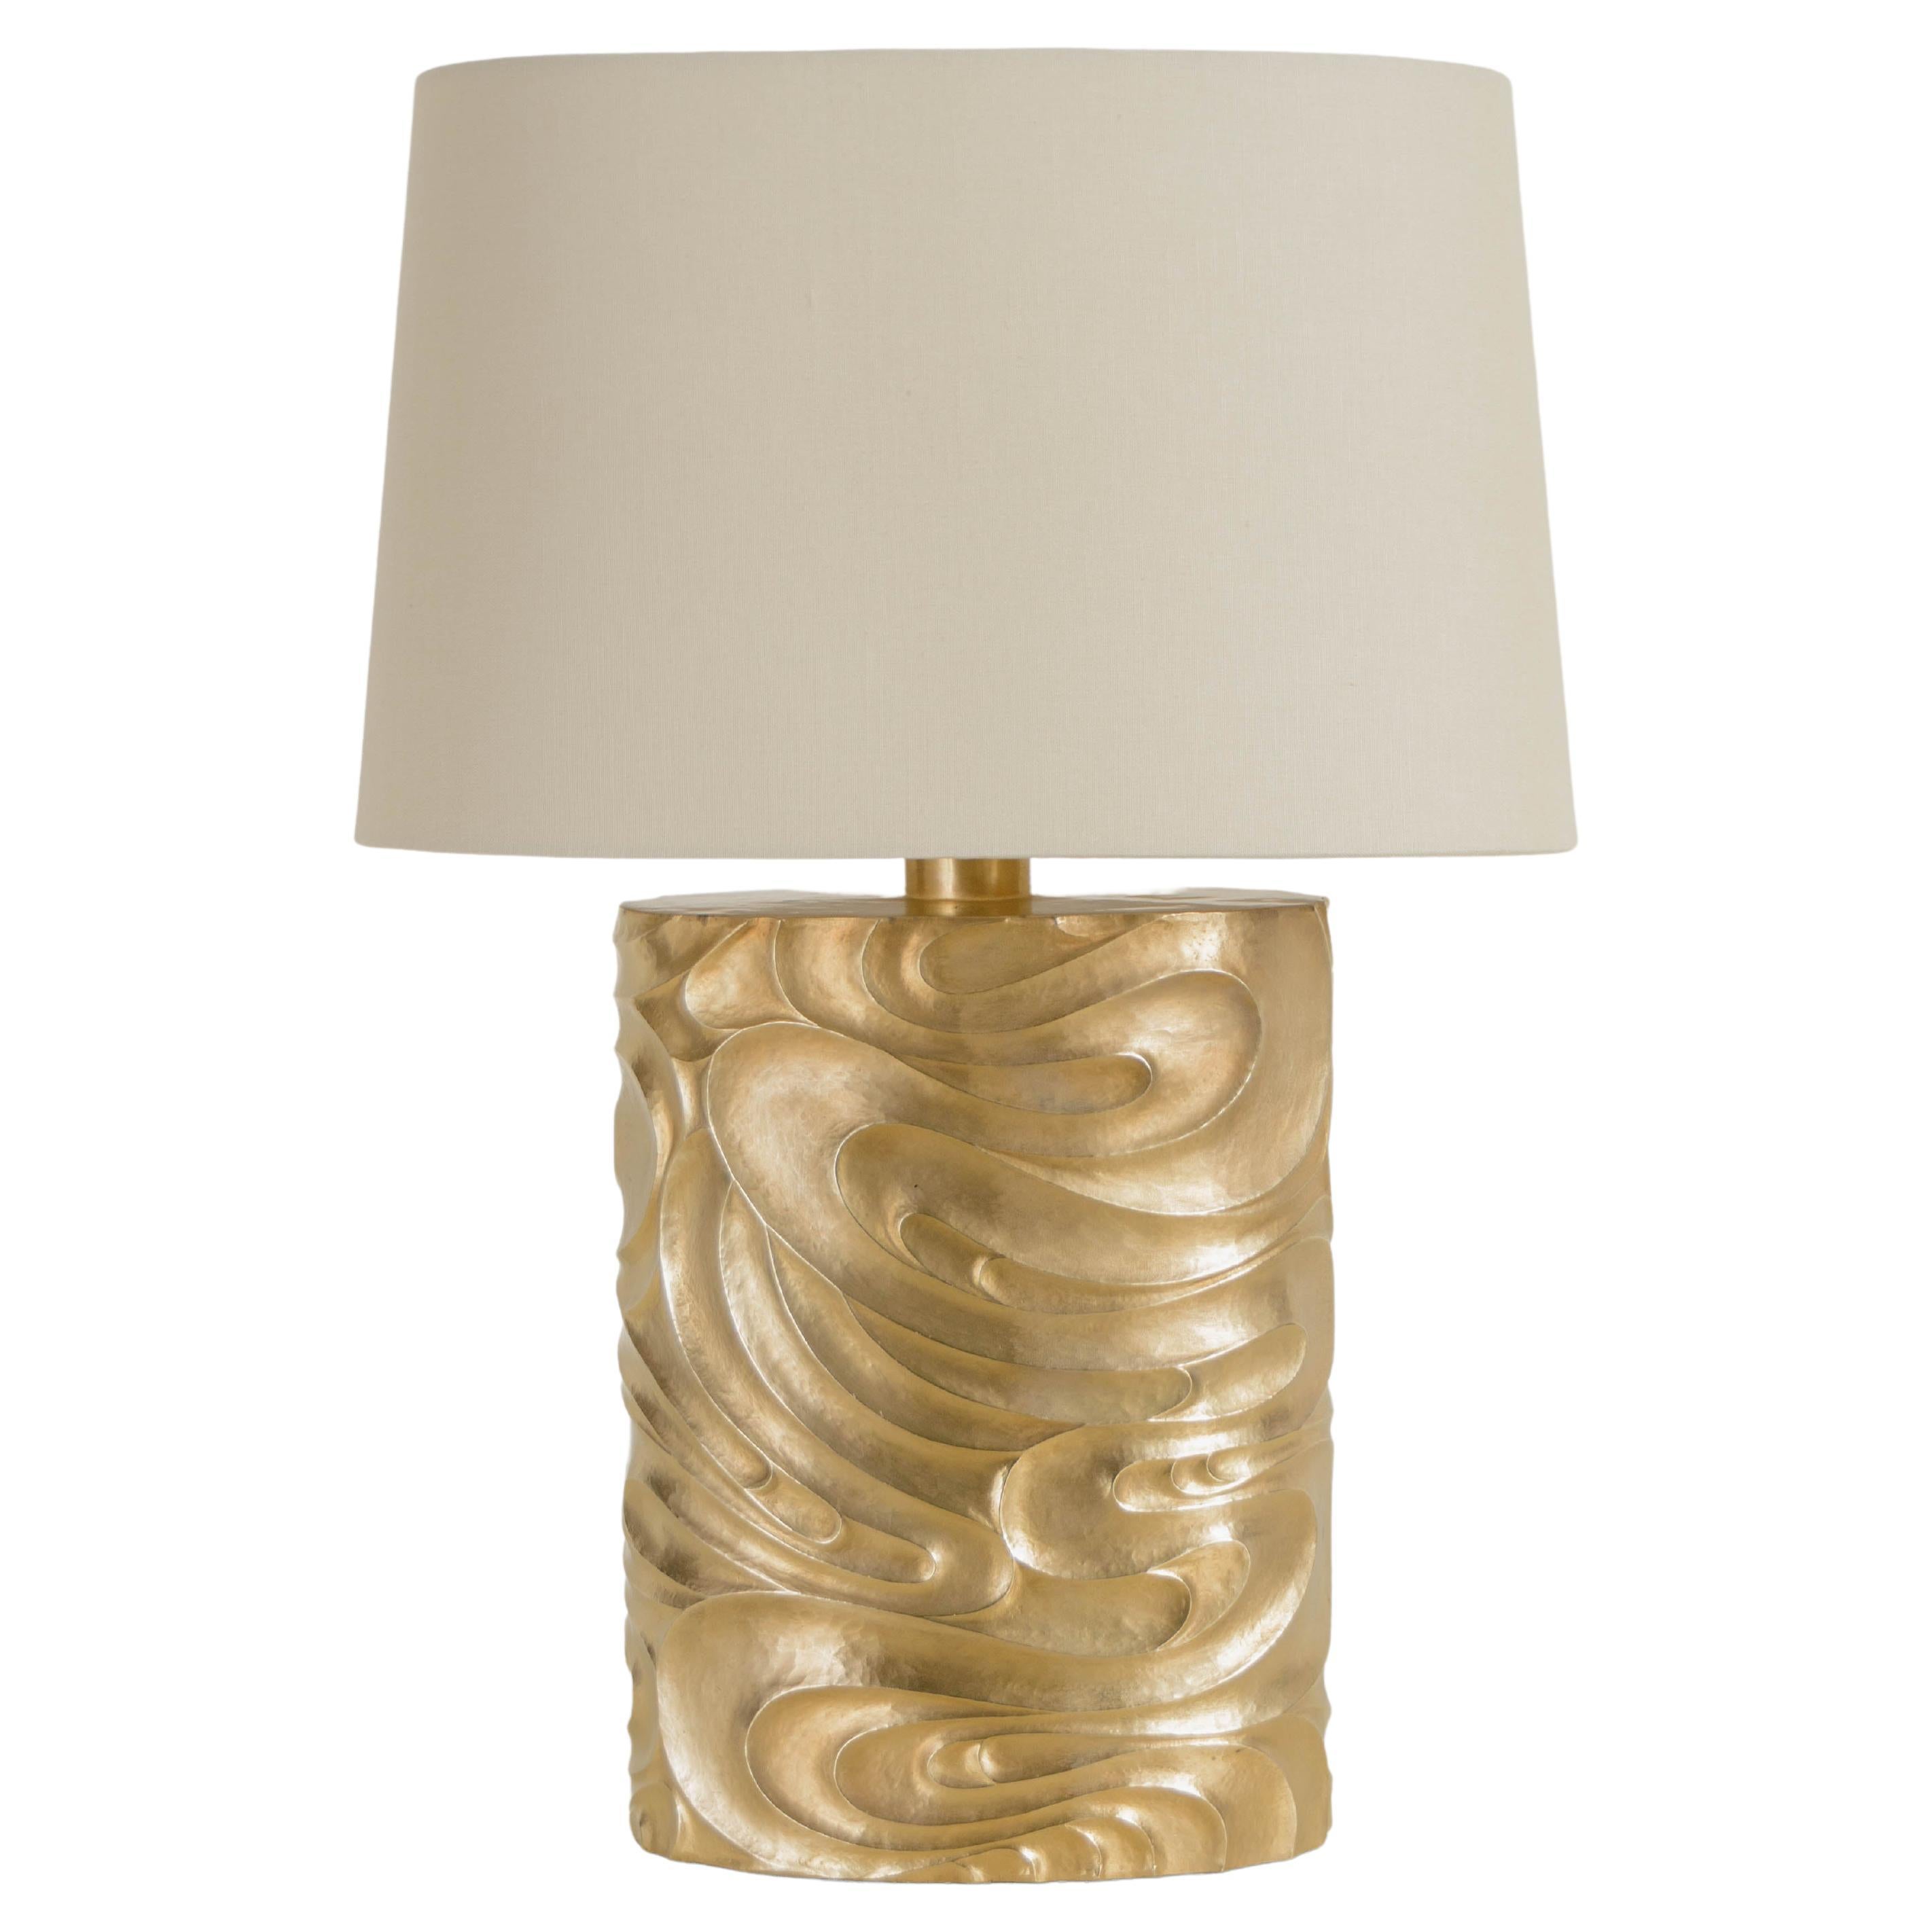 Contemporary 24K Gold Plated Oval Fei Tian Wen Lamp by Robert Kuo